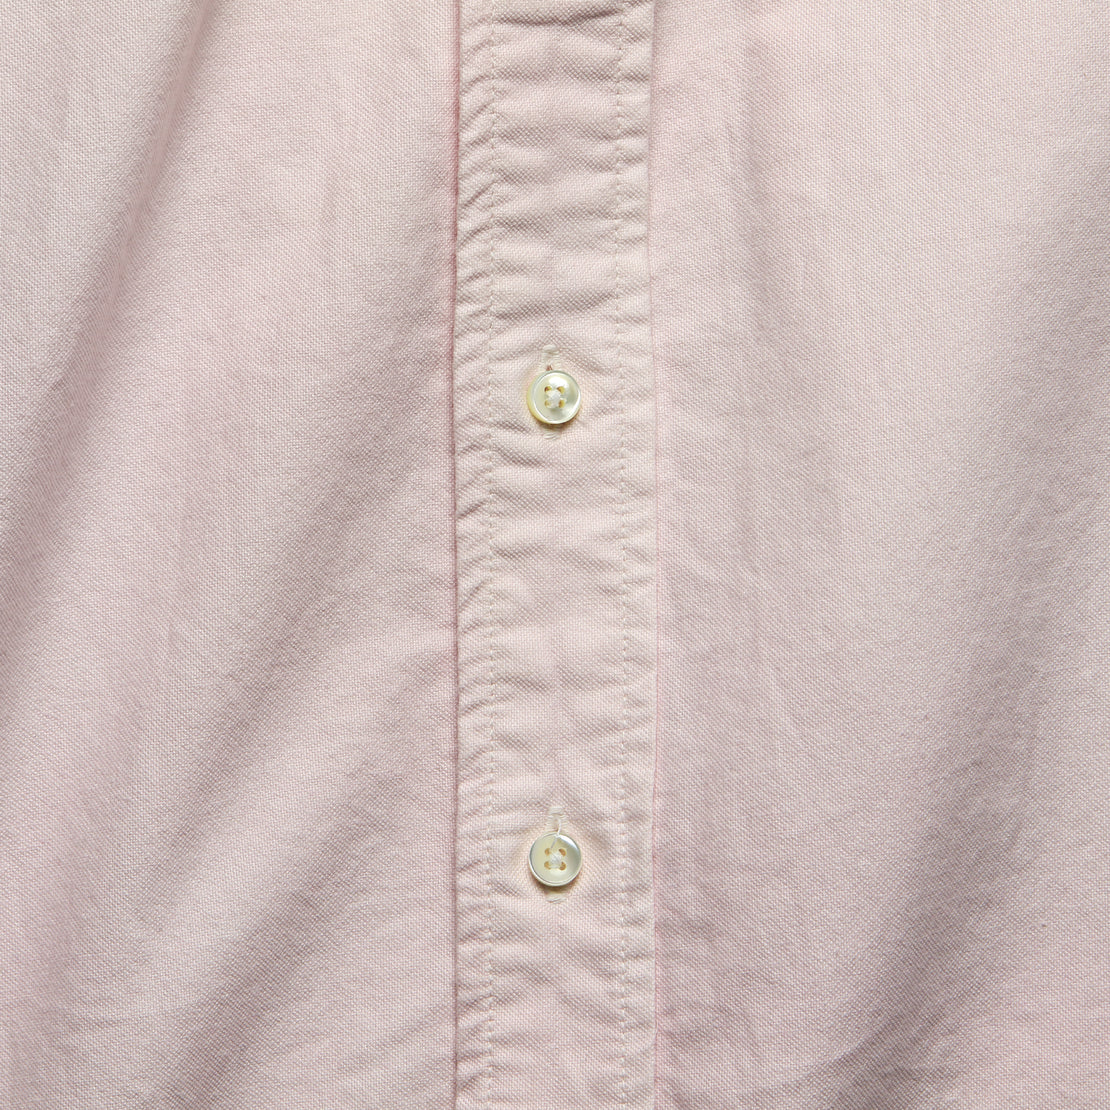 Overdyed Oxford Shirt - Pink - Alex Mill - STAG Provisions - Tops - L/S Woven - Solid